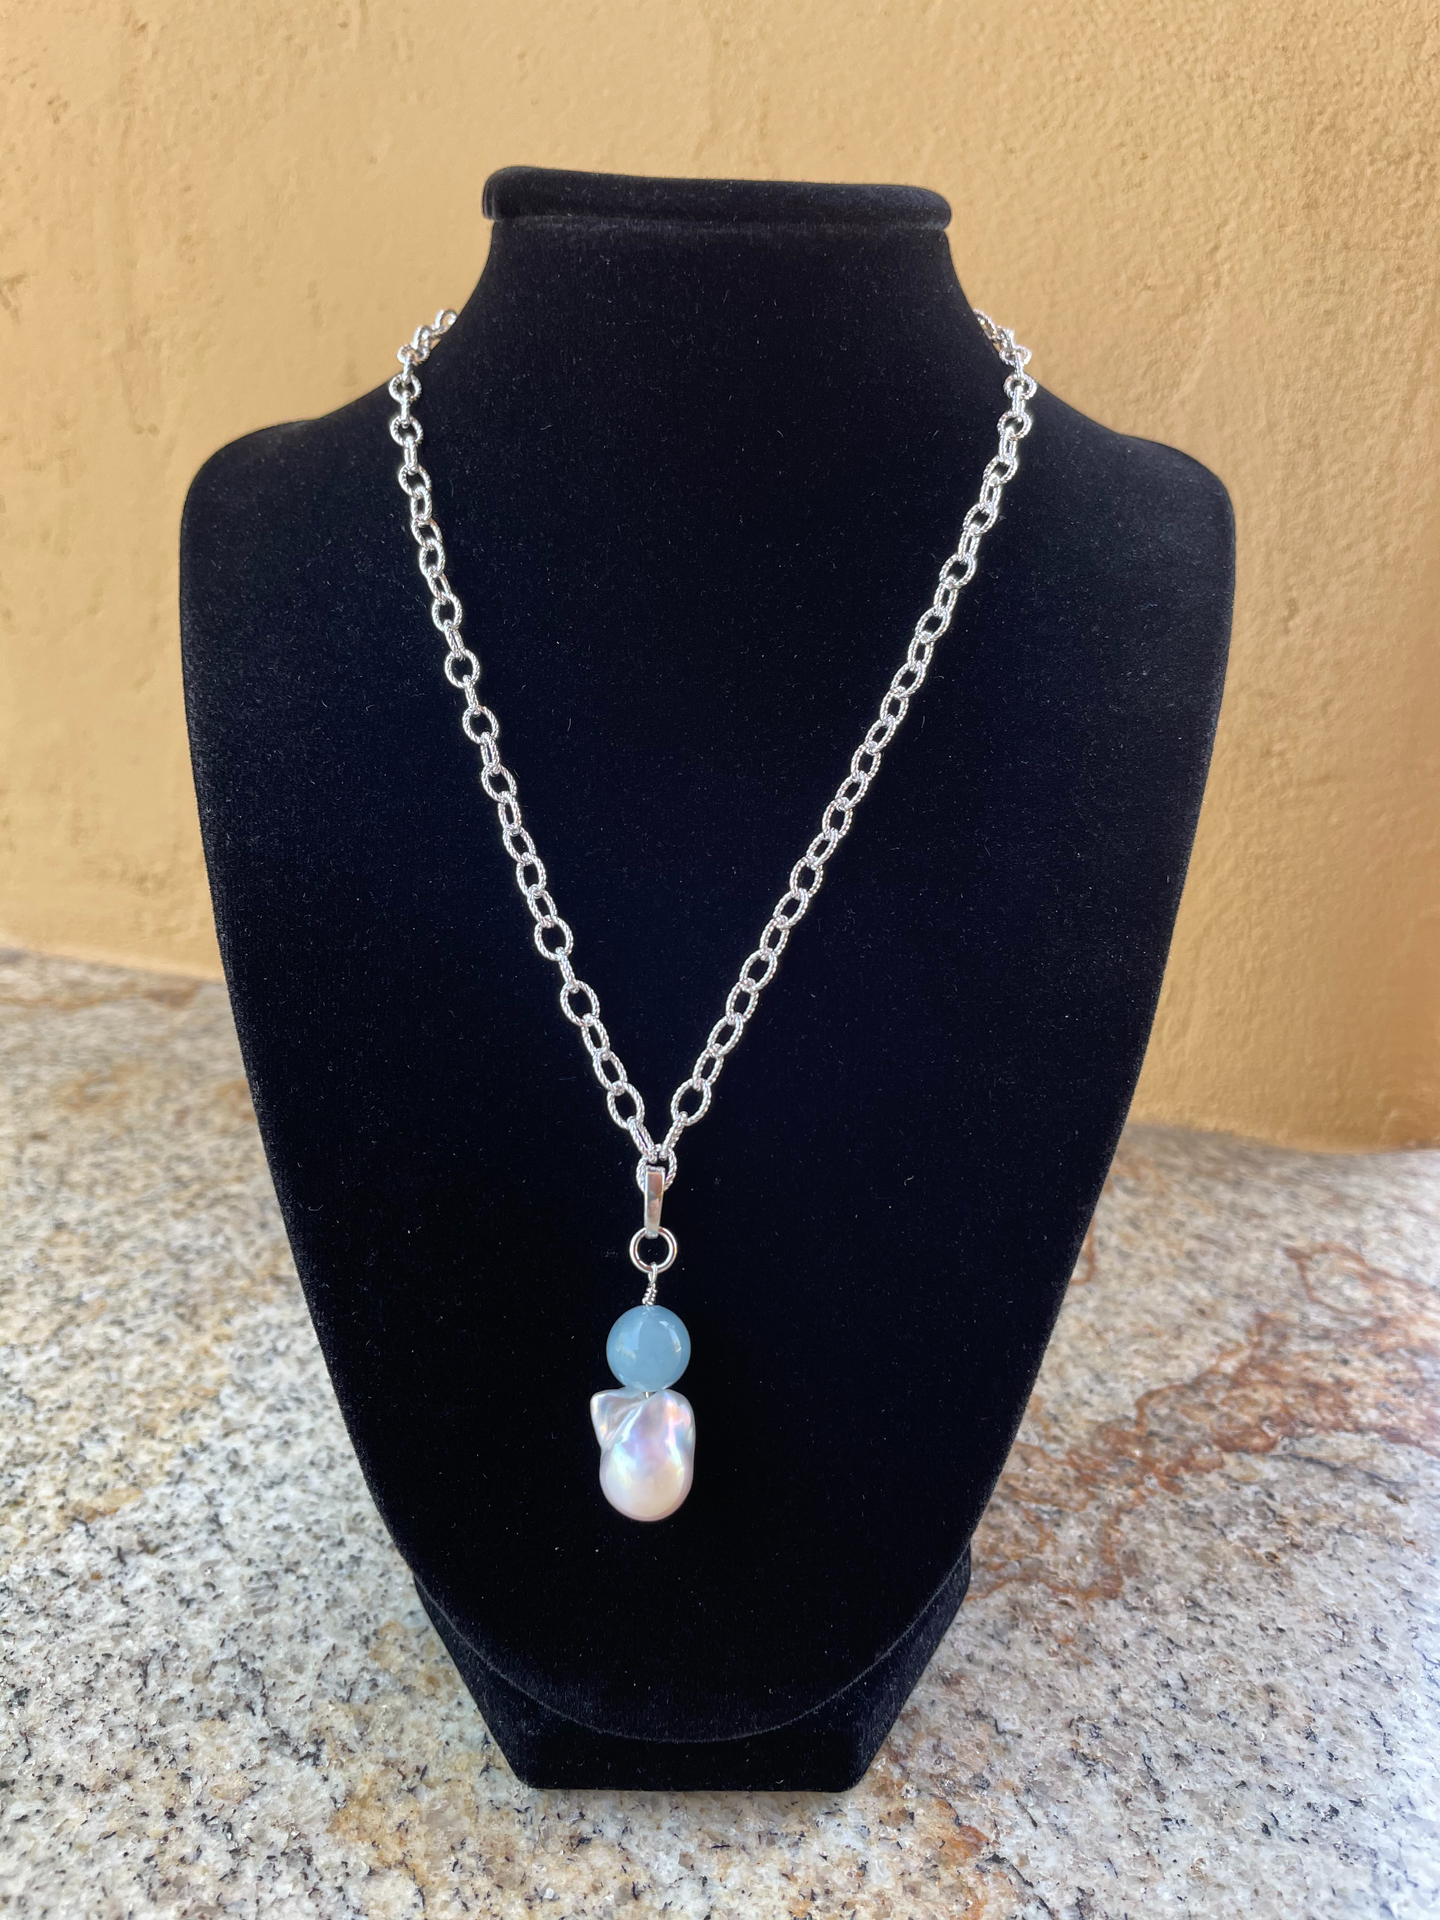 Necklace - Sterling silver with pearl and aquamarine pendant